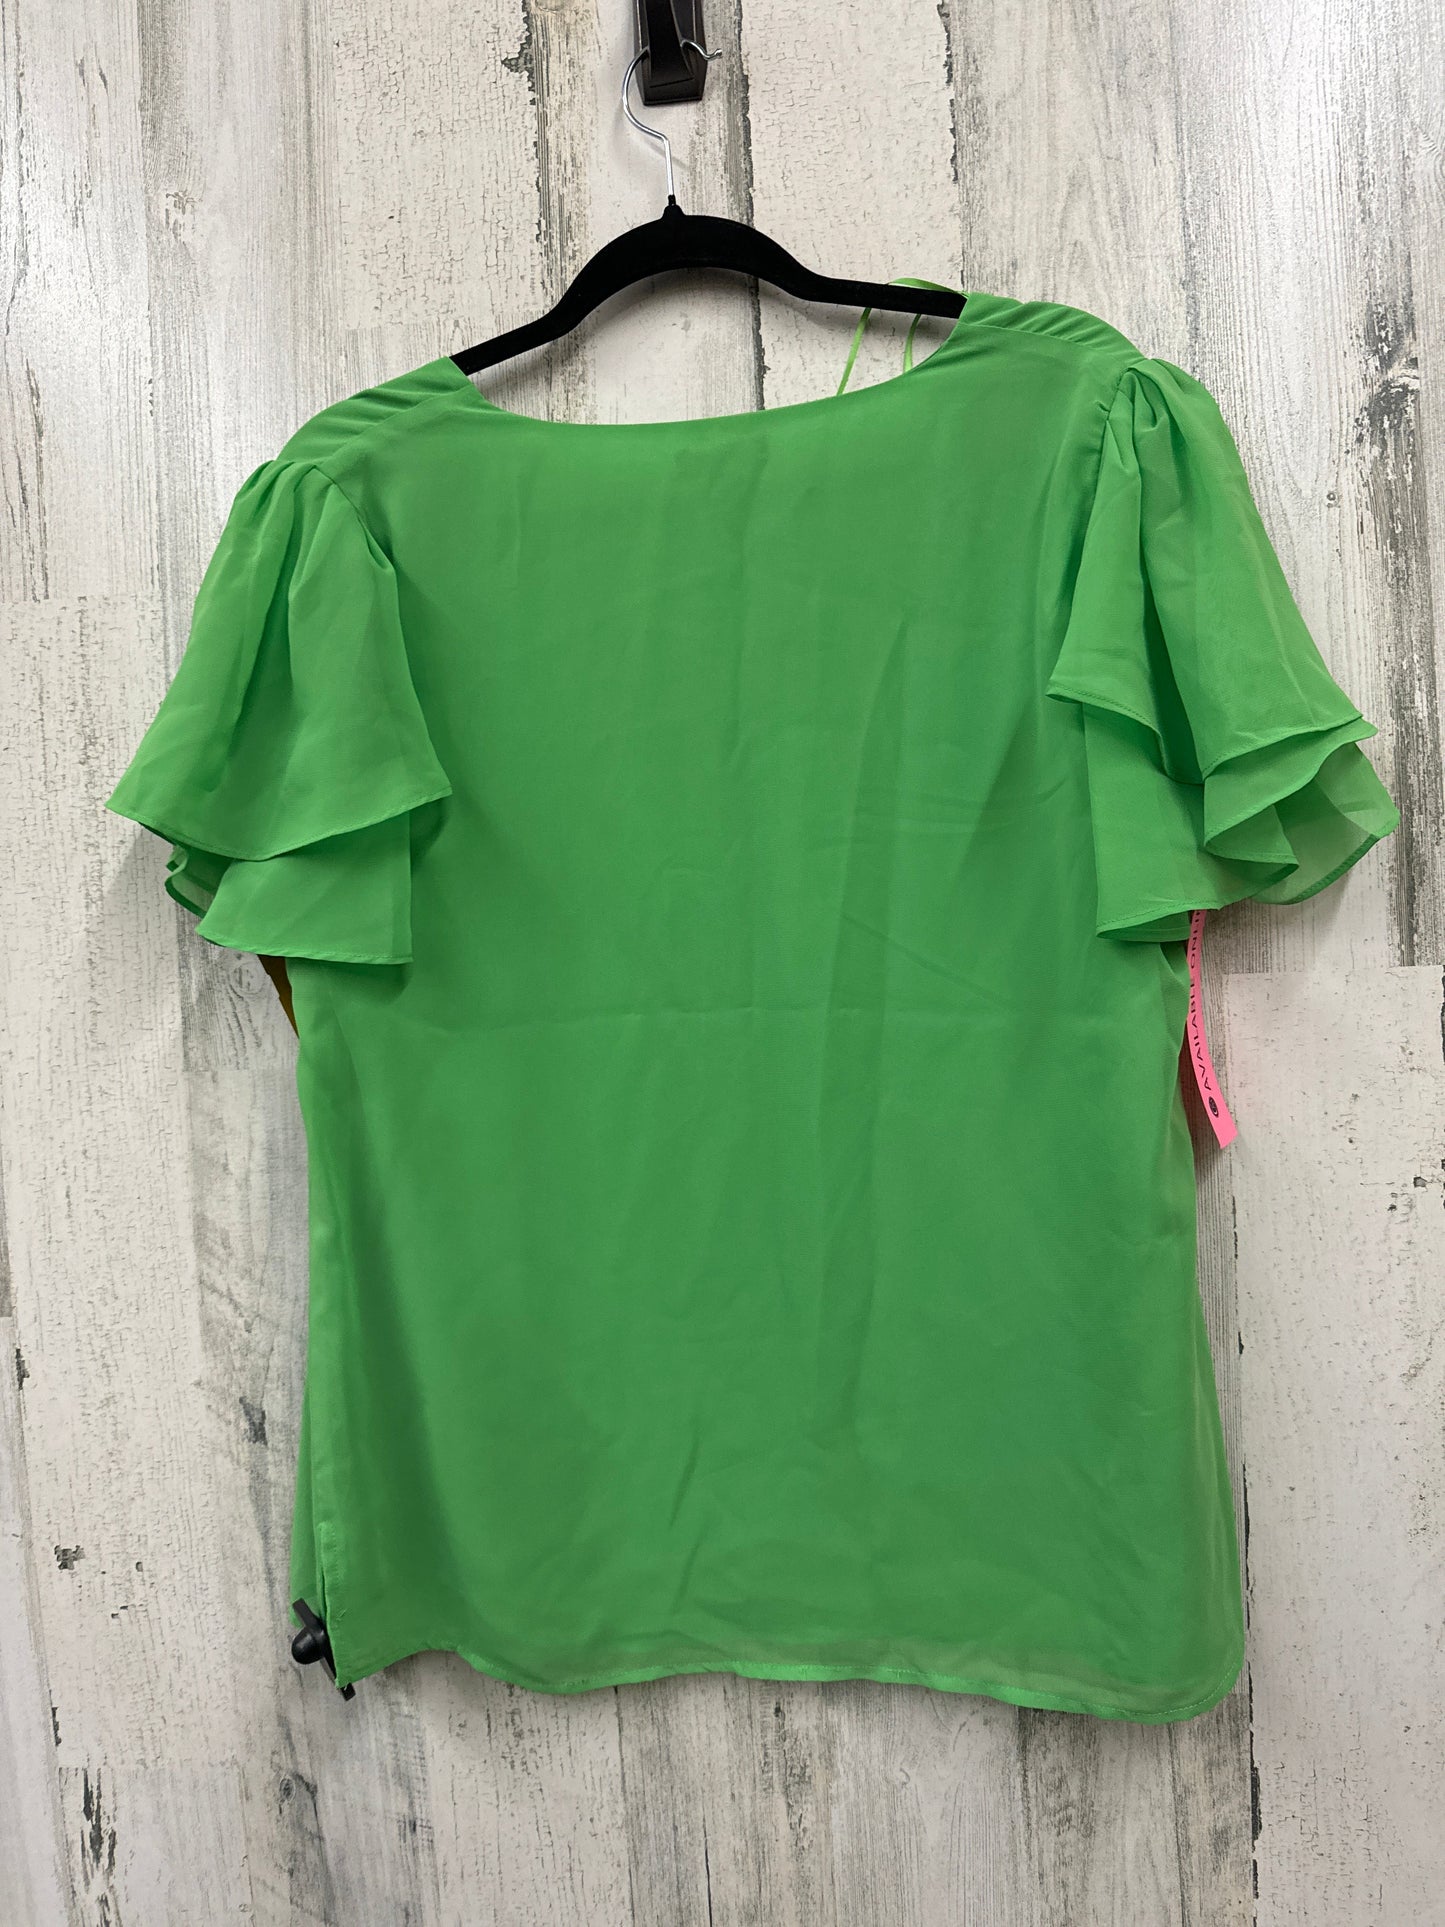 Top Short Sleeve By Vince Camuto  Size: M